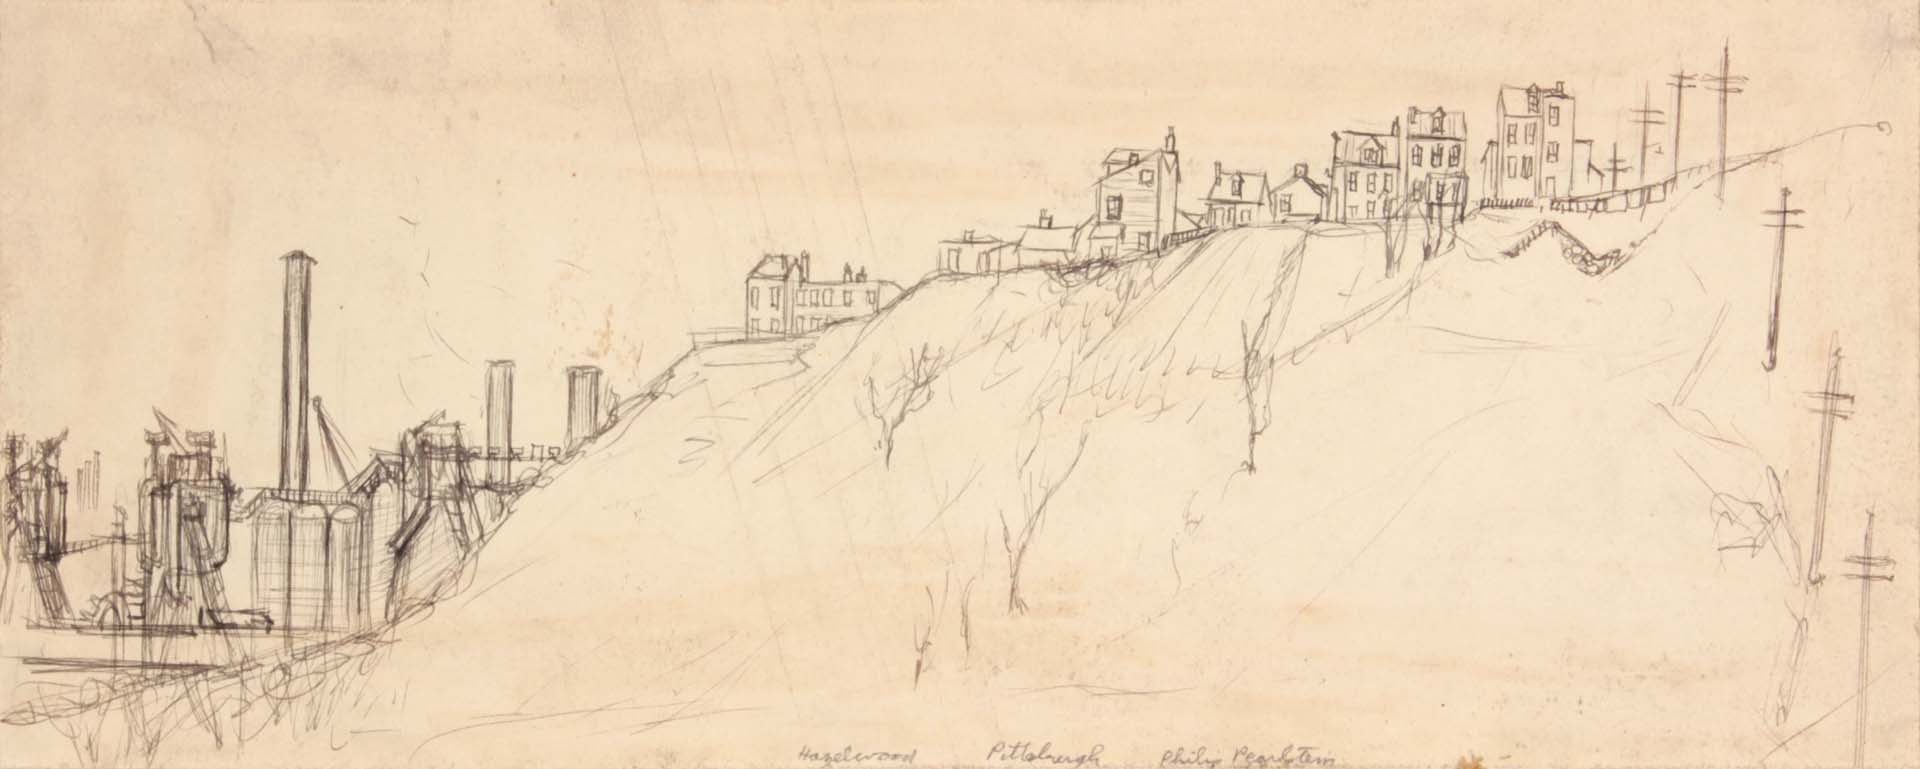 1949 Hazelwood Pittsburgh Graphite and Pen and Ink on Paper 5.4375 x 13.625